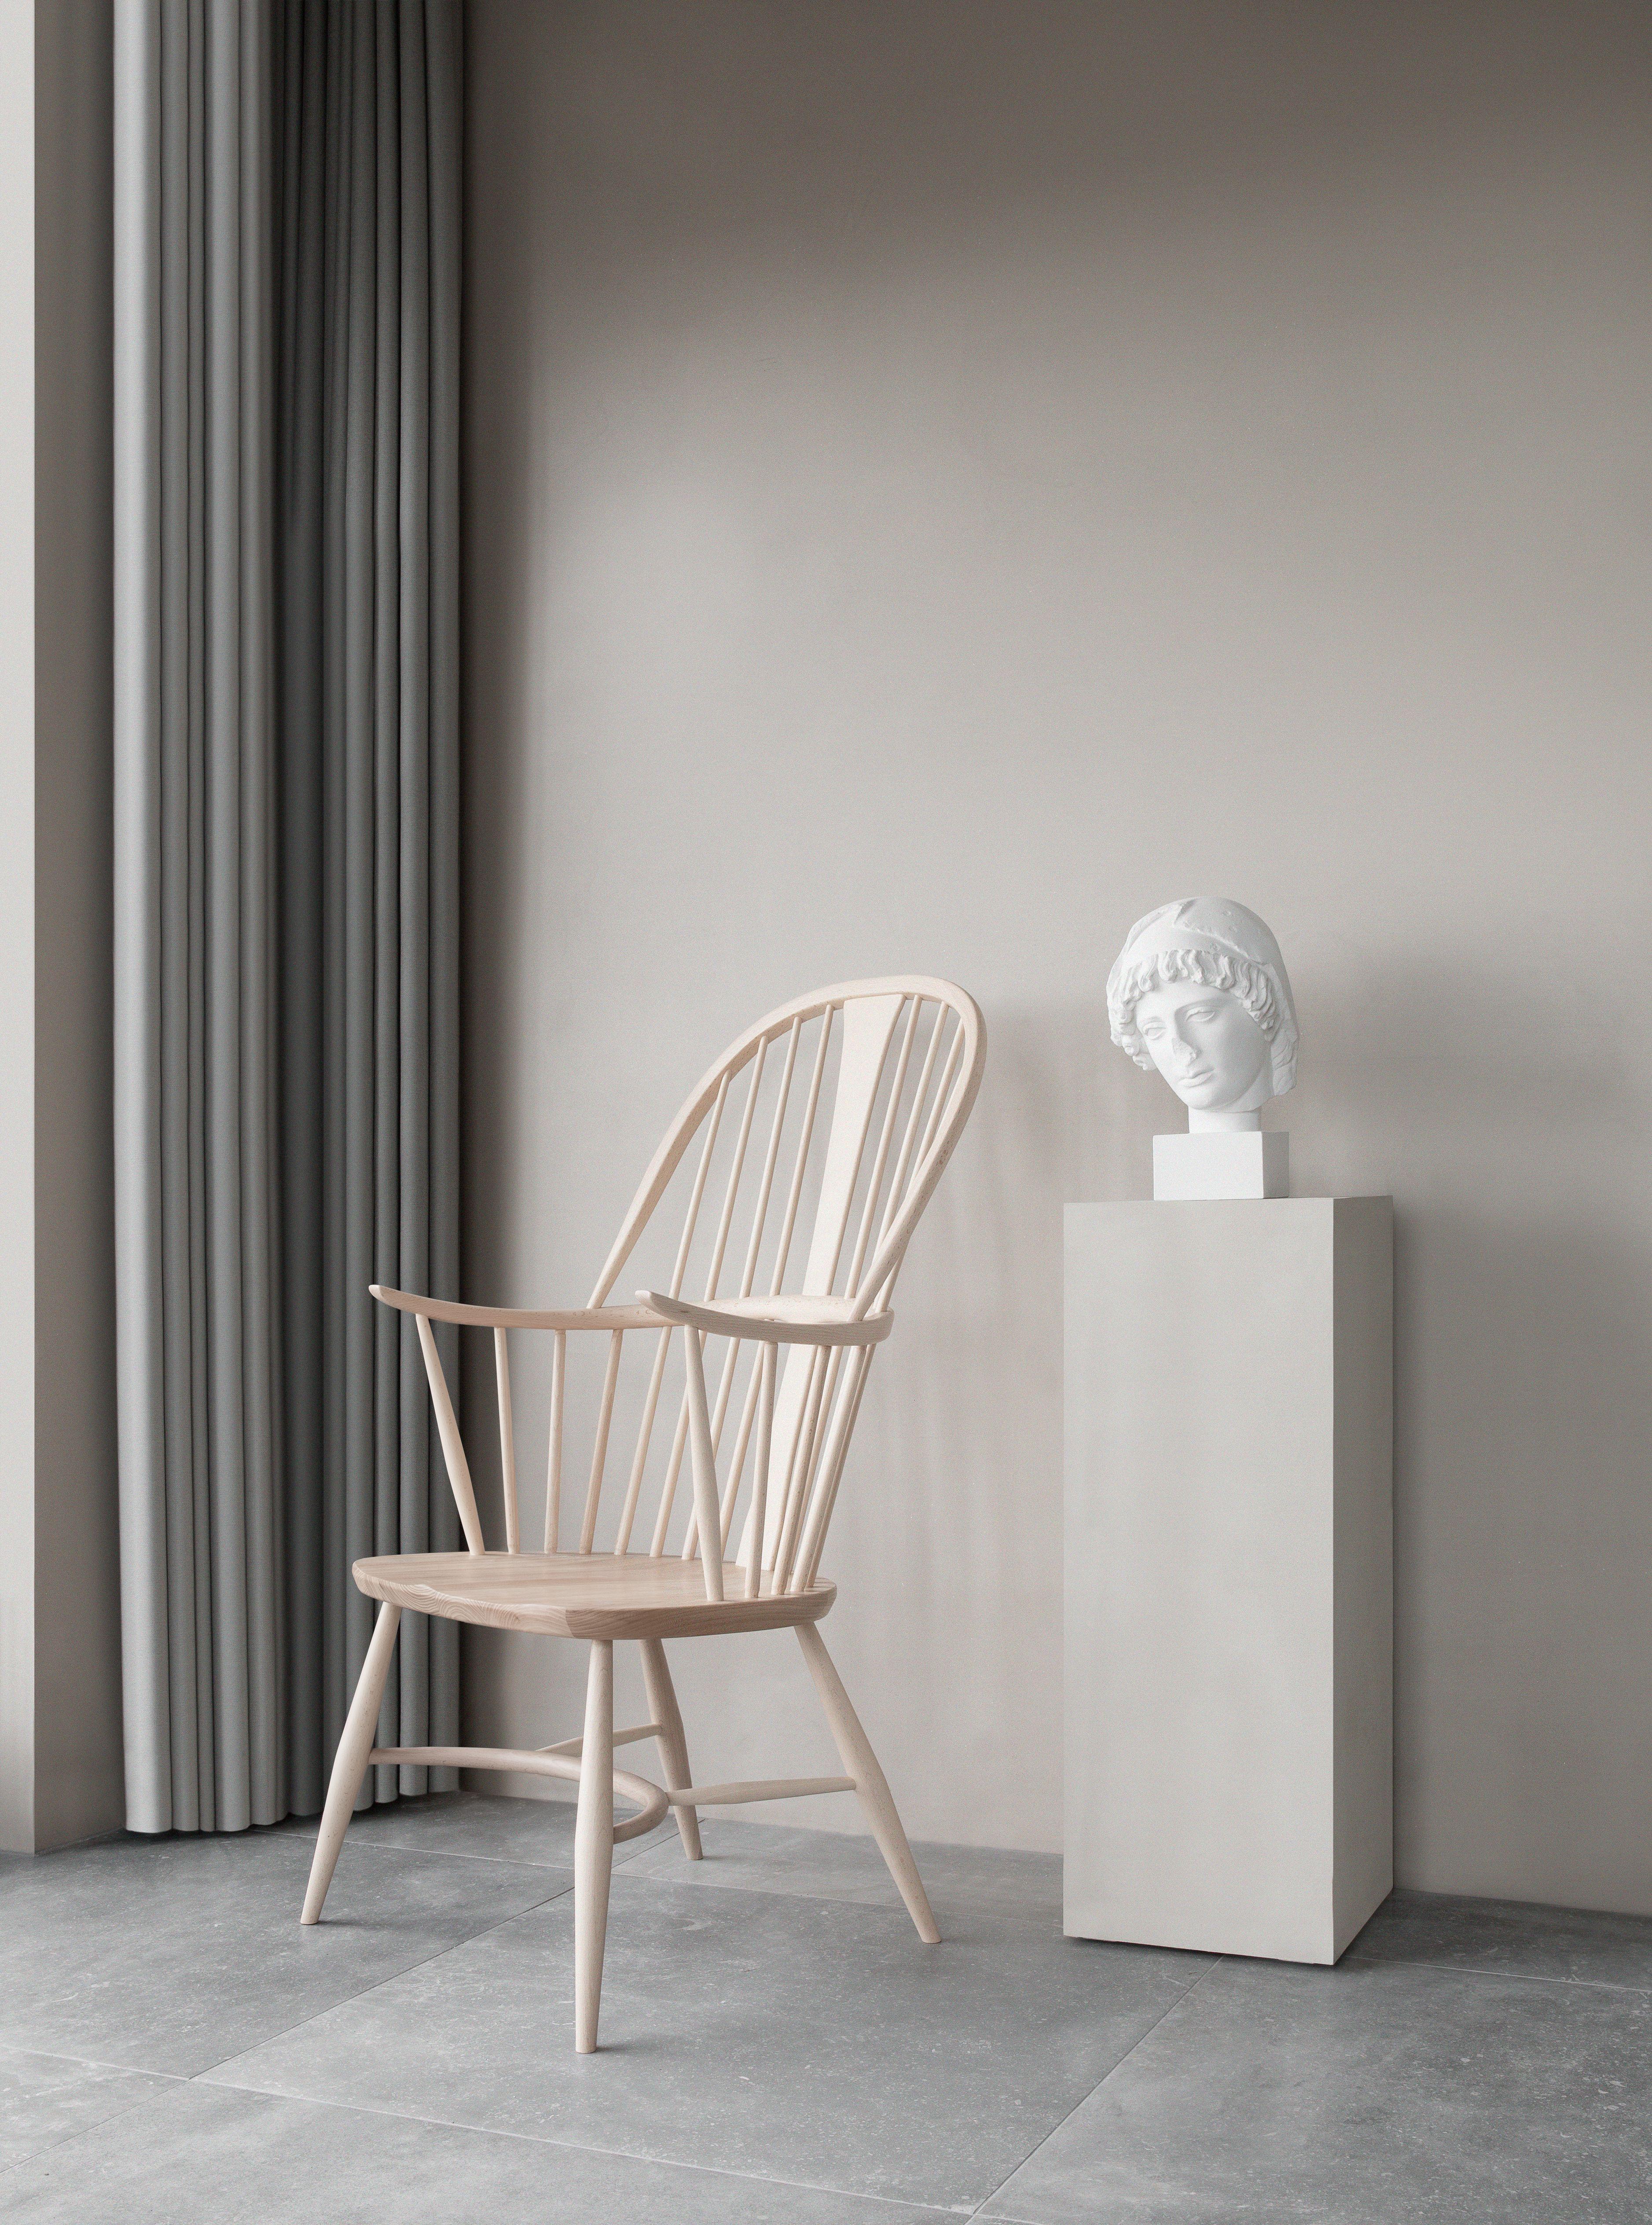 Since the beginning of time, designers and craftsmen have experienced a profound, oftentimes intuitive connection to wood as a building material. Lucian Ercolani echoed this affinity in 1956 with the construction of the CHAIRMAKERS CHAIR, a stirring